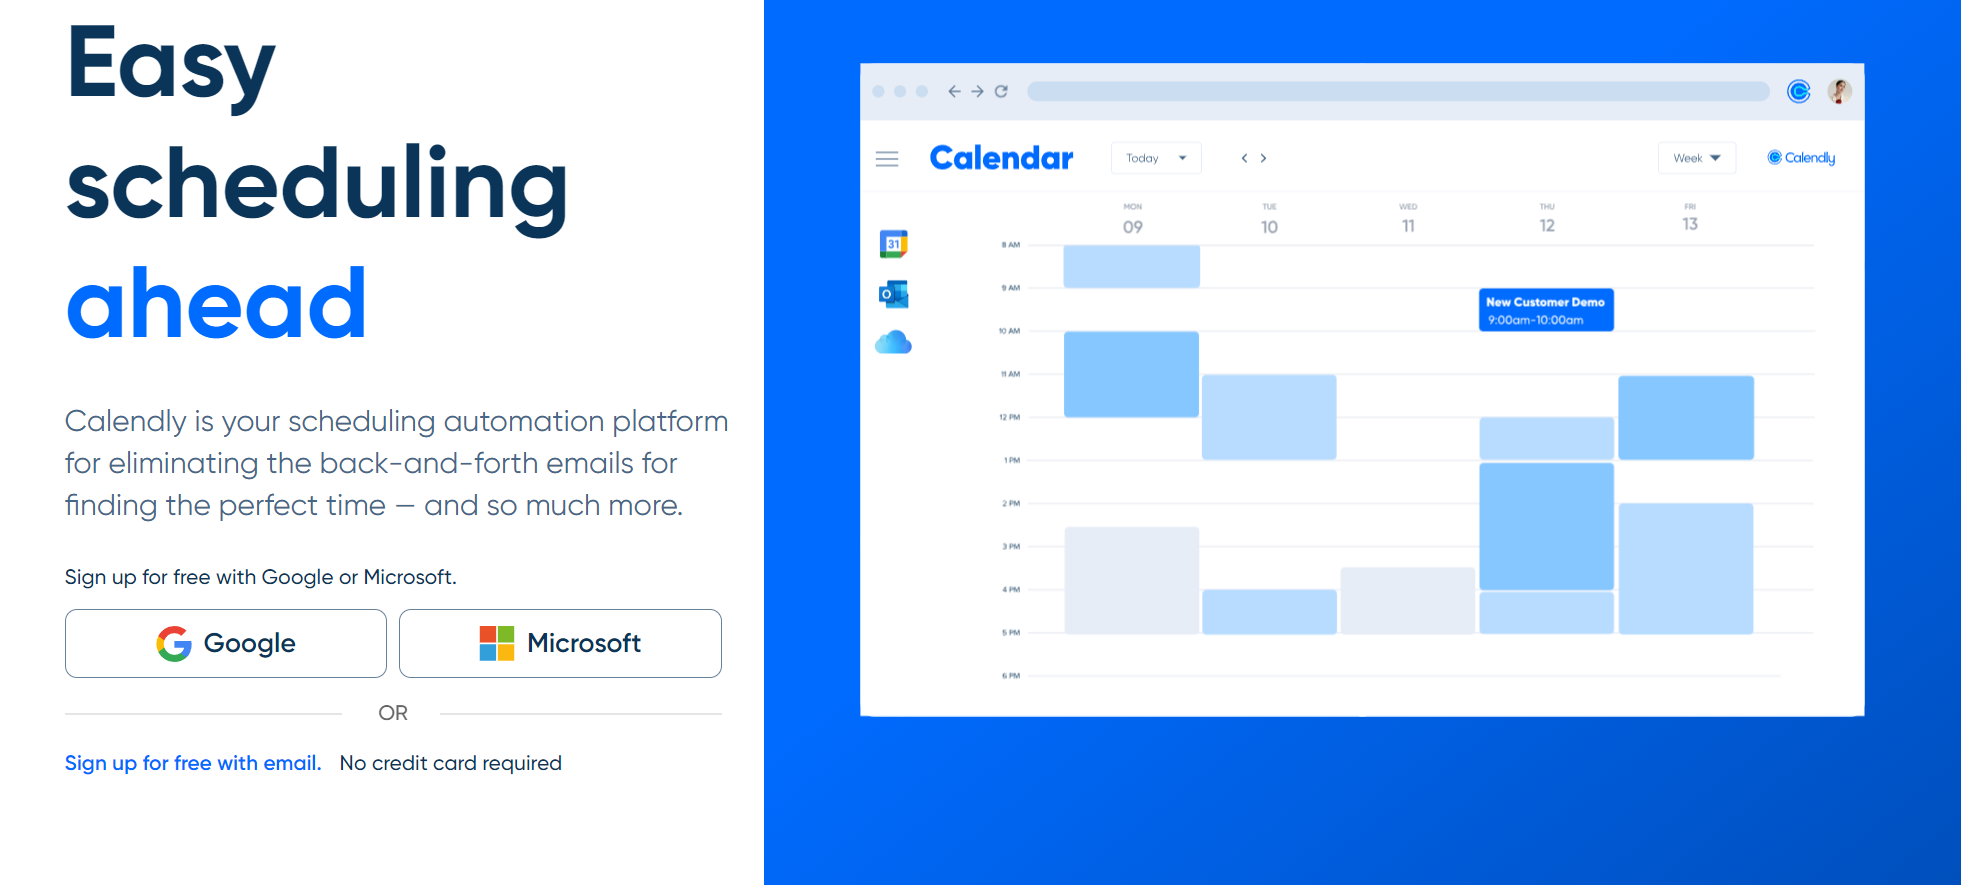 Calendly's homepage is designed to convert a high percentage of site visitors